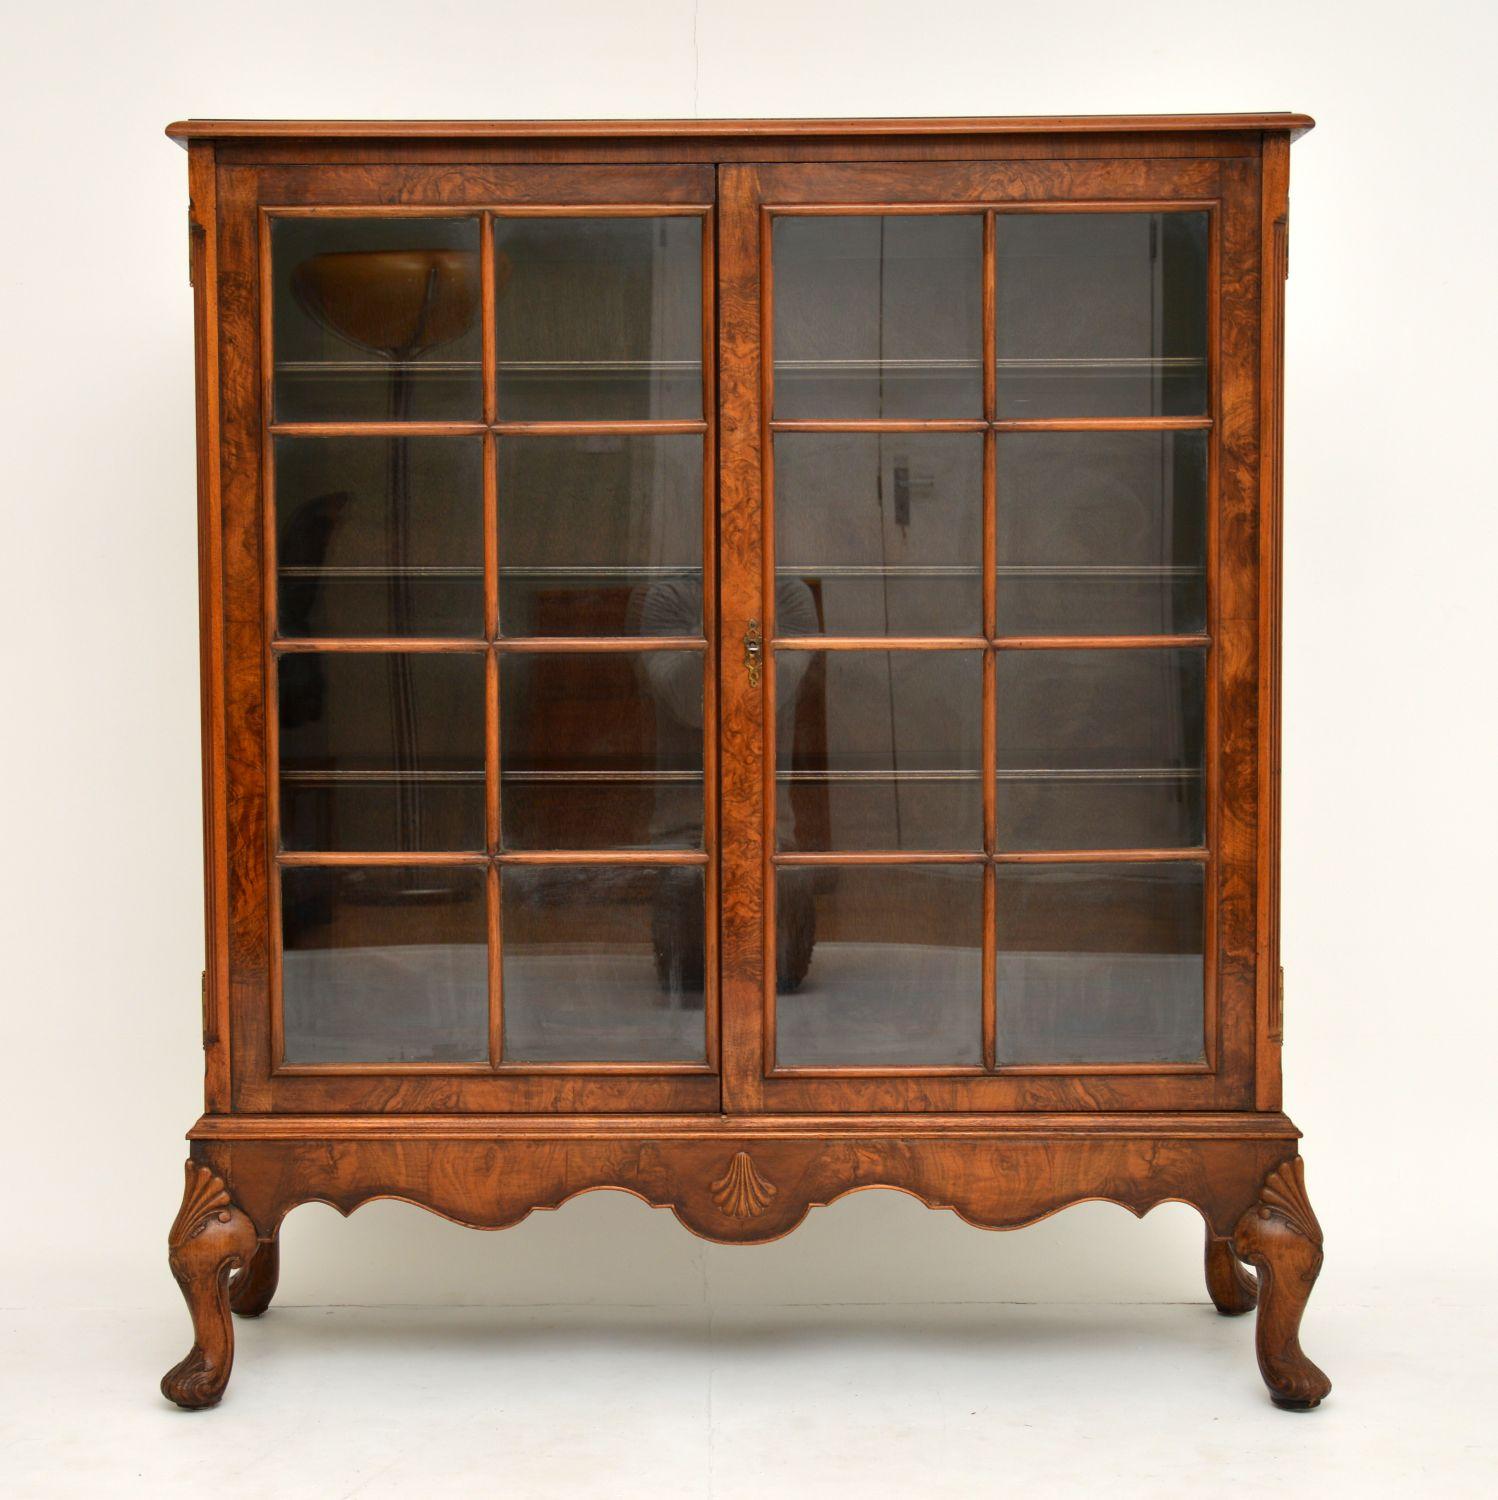 A stunning antique bookcase in burr walnut, this dates from the 1920s period. It is of very fine quality, with many beautiful details.

The legs have deep heavy carving and the base has a beautiful shape. The walnut veneers and colour are